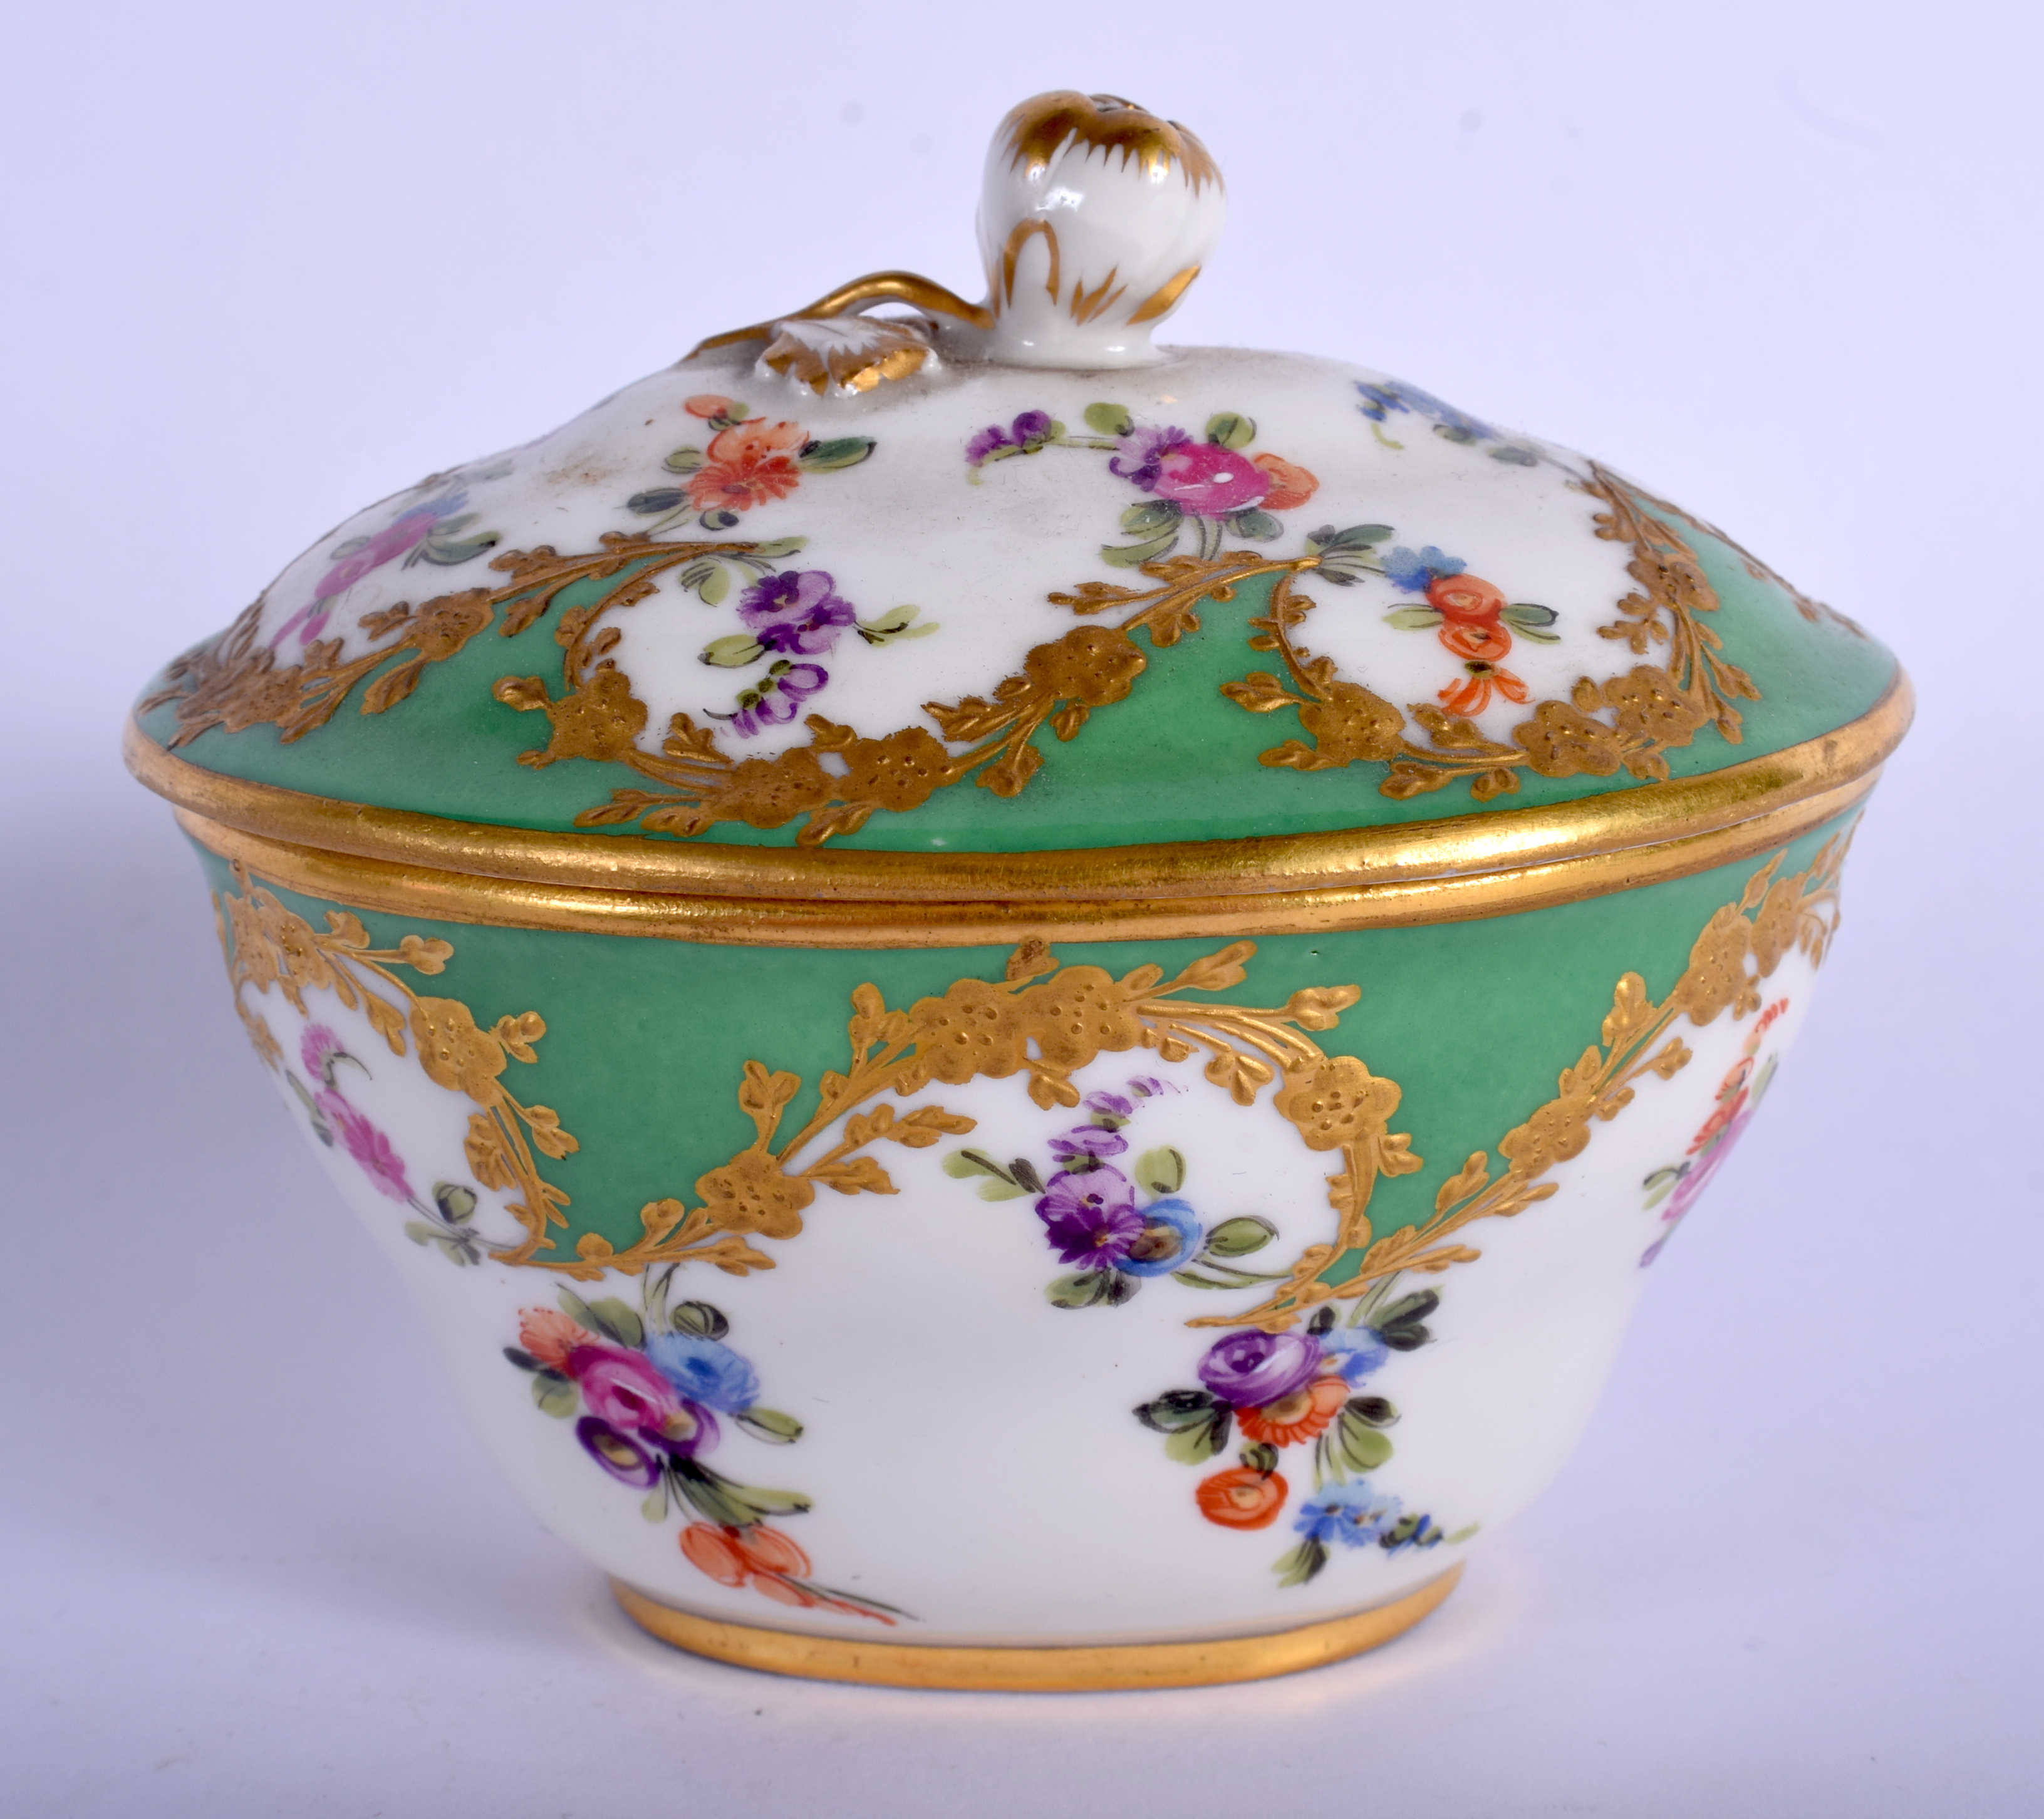 19th c. Paris porcelain oval box and cover painted with flowers in a shape raised gilt panel on an a